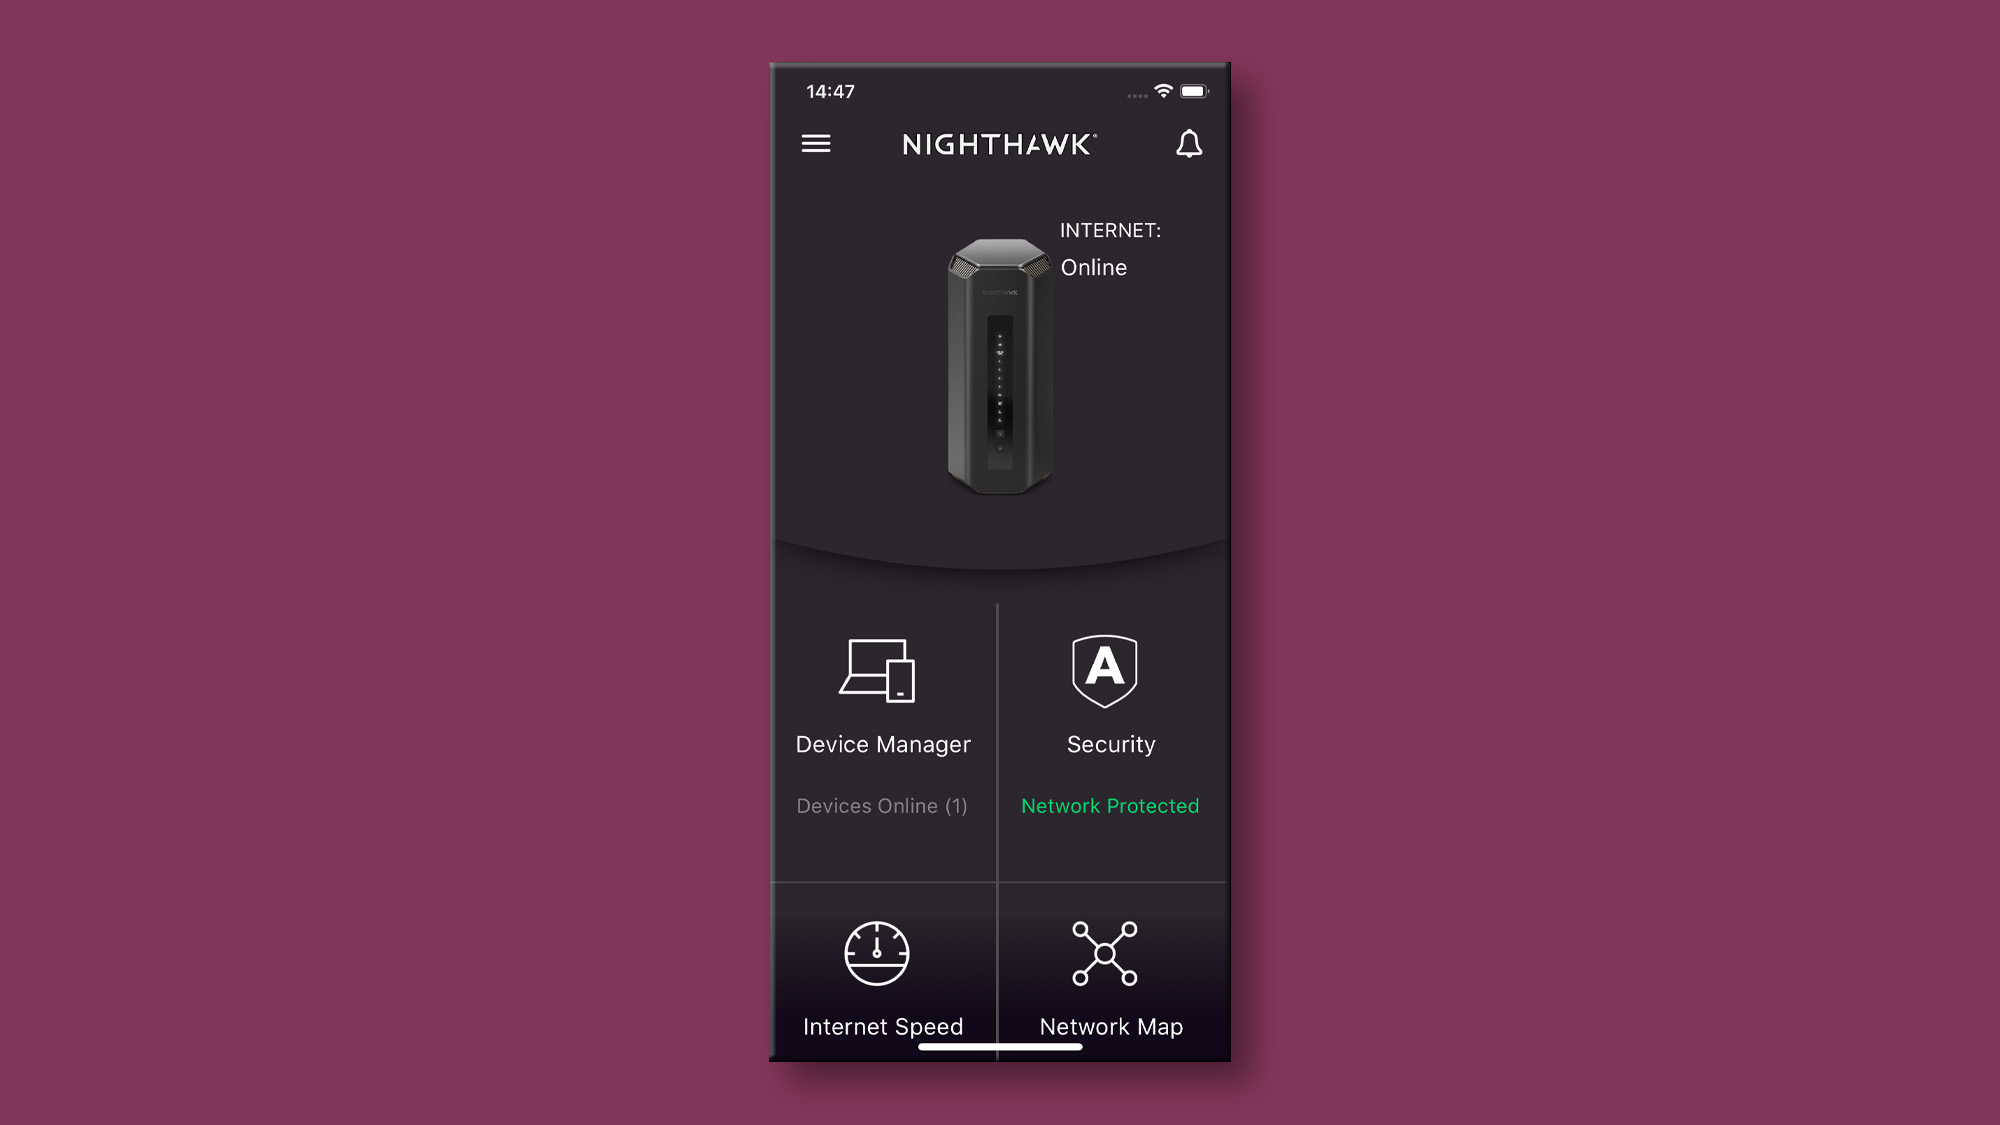 The mobile app interface for the Netgear Nighthawk RS700S